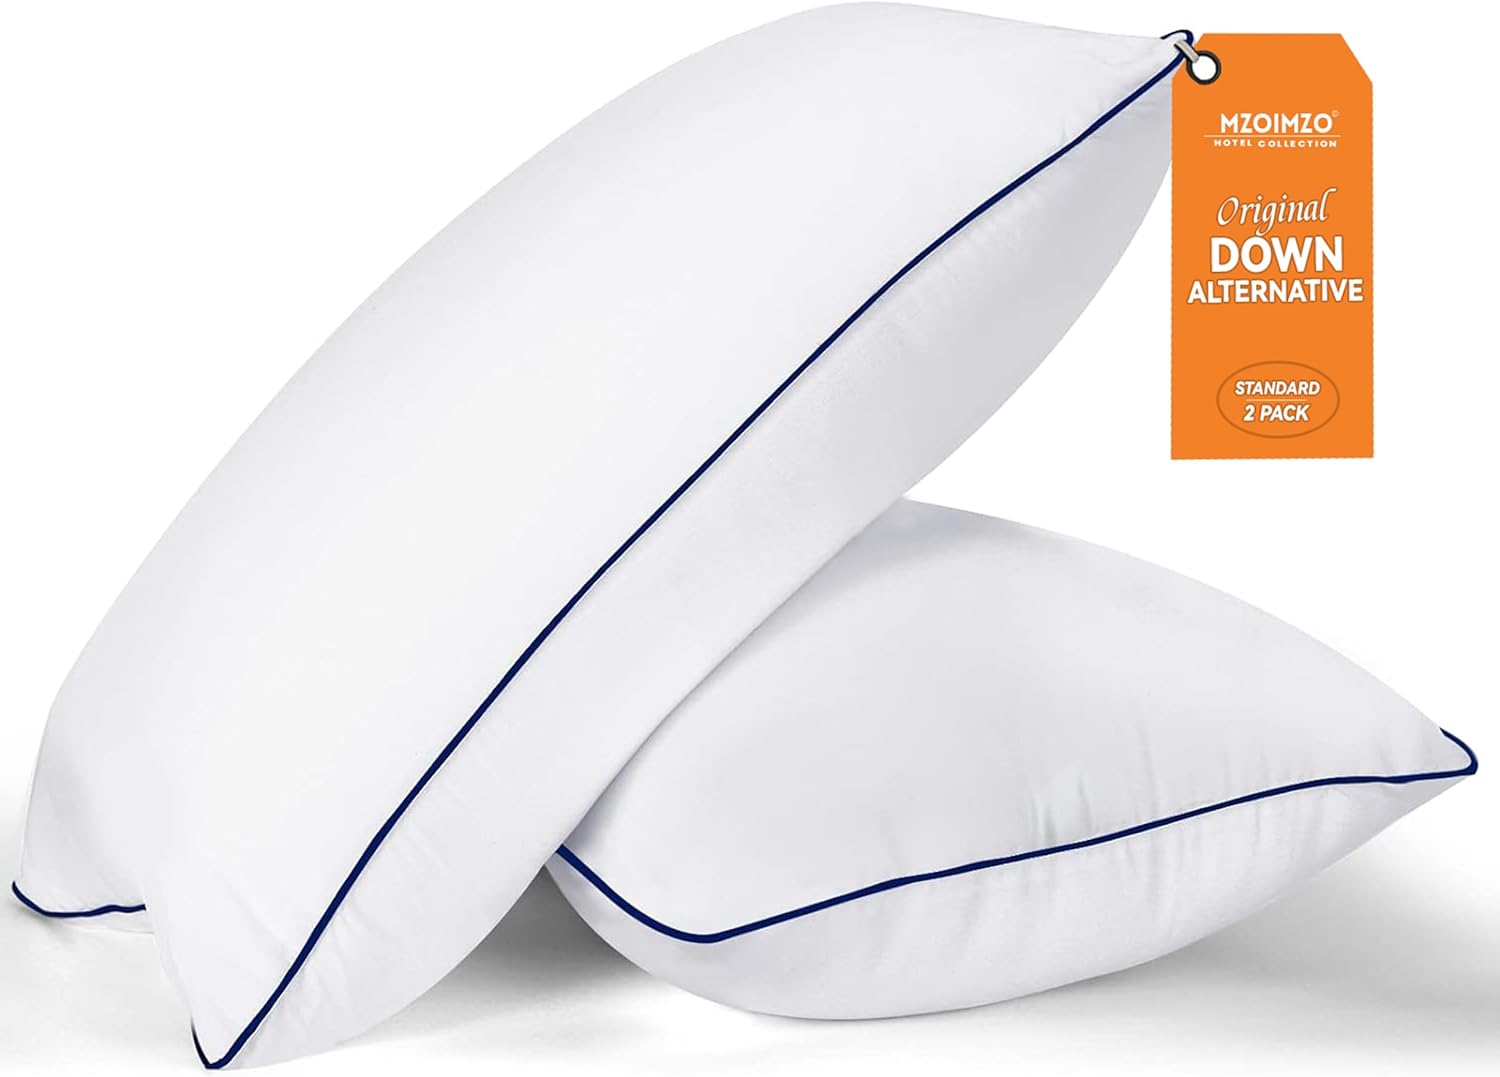 The MZOIMZO Bed Pillows for Sleeping have exceeded my expectations in terms of both comfort and quality. The king size offers ample space, and the premium soft down alternative fill provides the perfect balance of support and plushness. The cooling feature adds a refreshing touch, making it ideal for a comfortable night' sleep. As a back sleeper, I find these pillows to be exceptionally supportive. The set of 2 ensures consistency, and the hotel-quality feel is evident. If you're searching for 